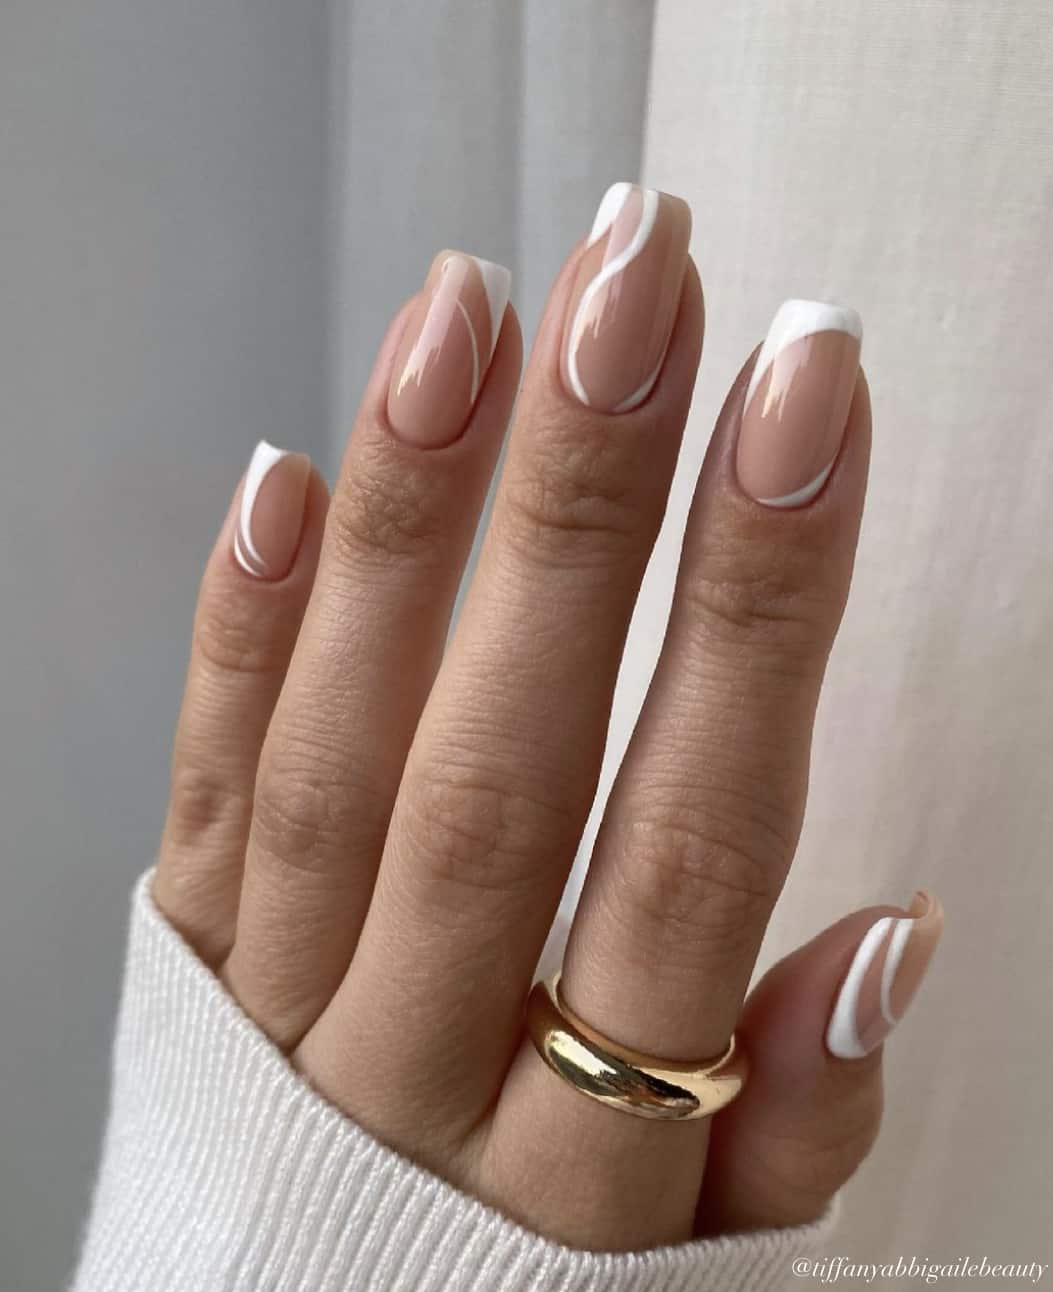 A hand with short square nails painted with nude polish and white wave accents with a glossy finish